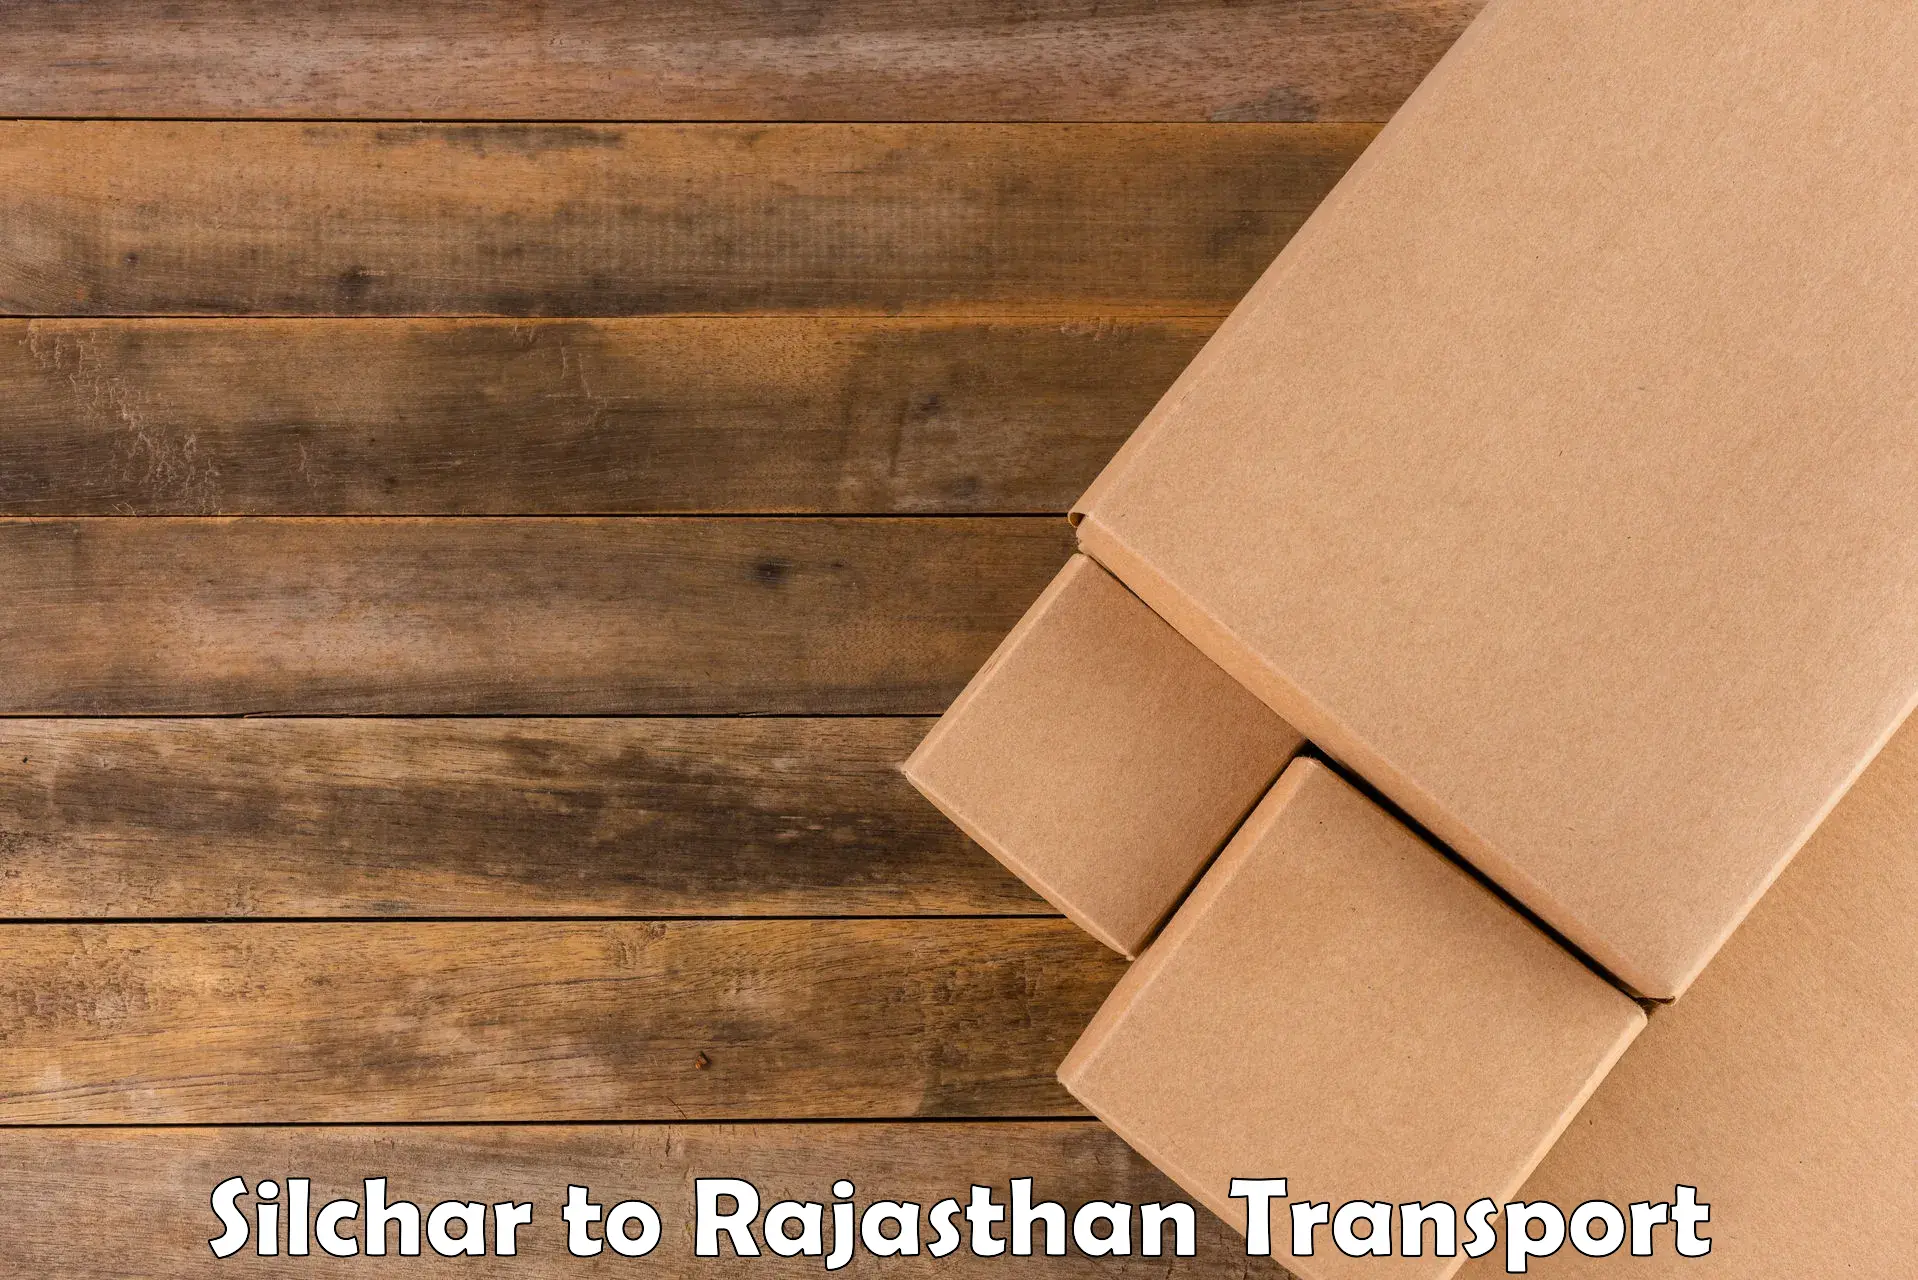 Truck transport companies in India Silchar to Ajeetgarh